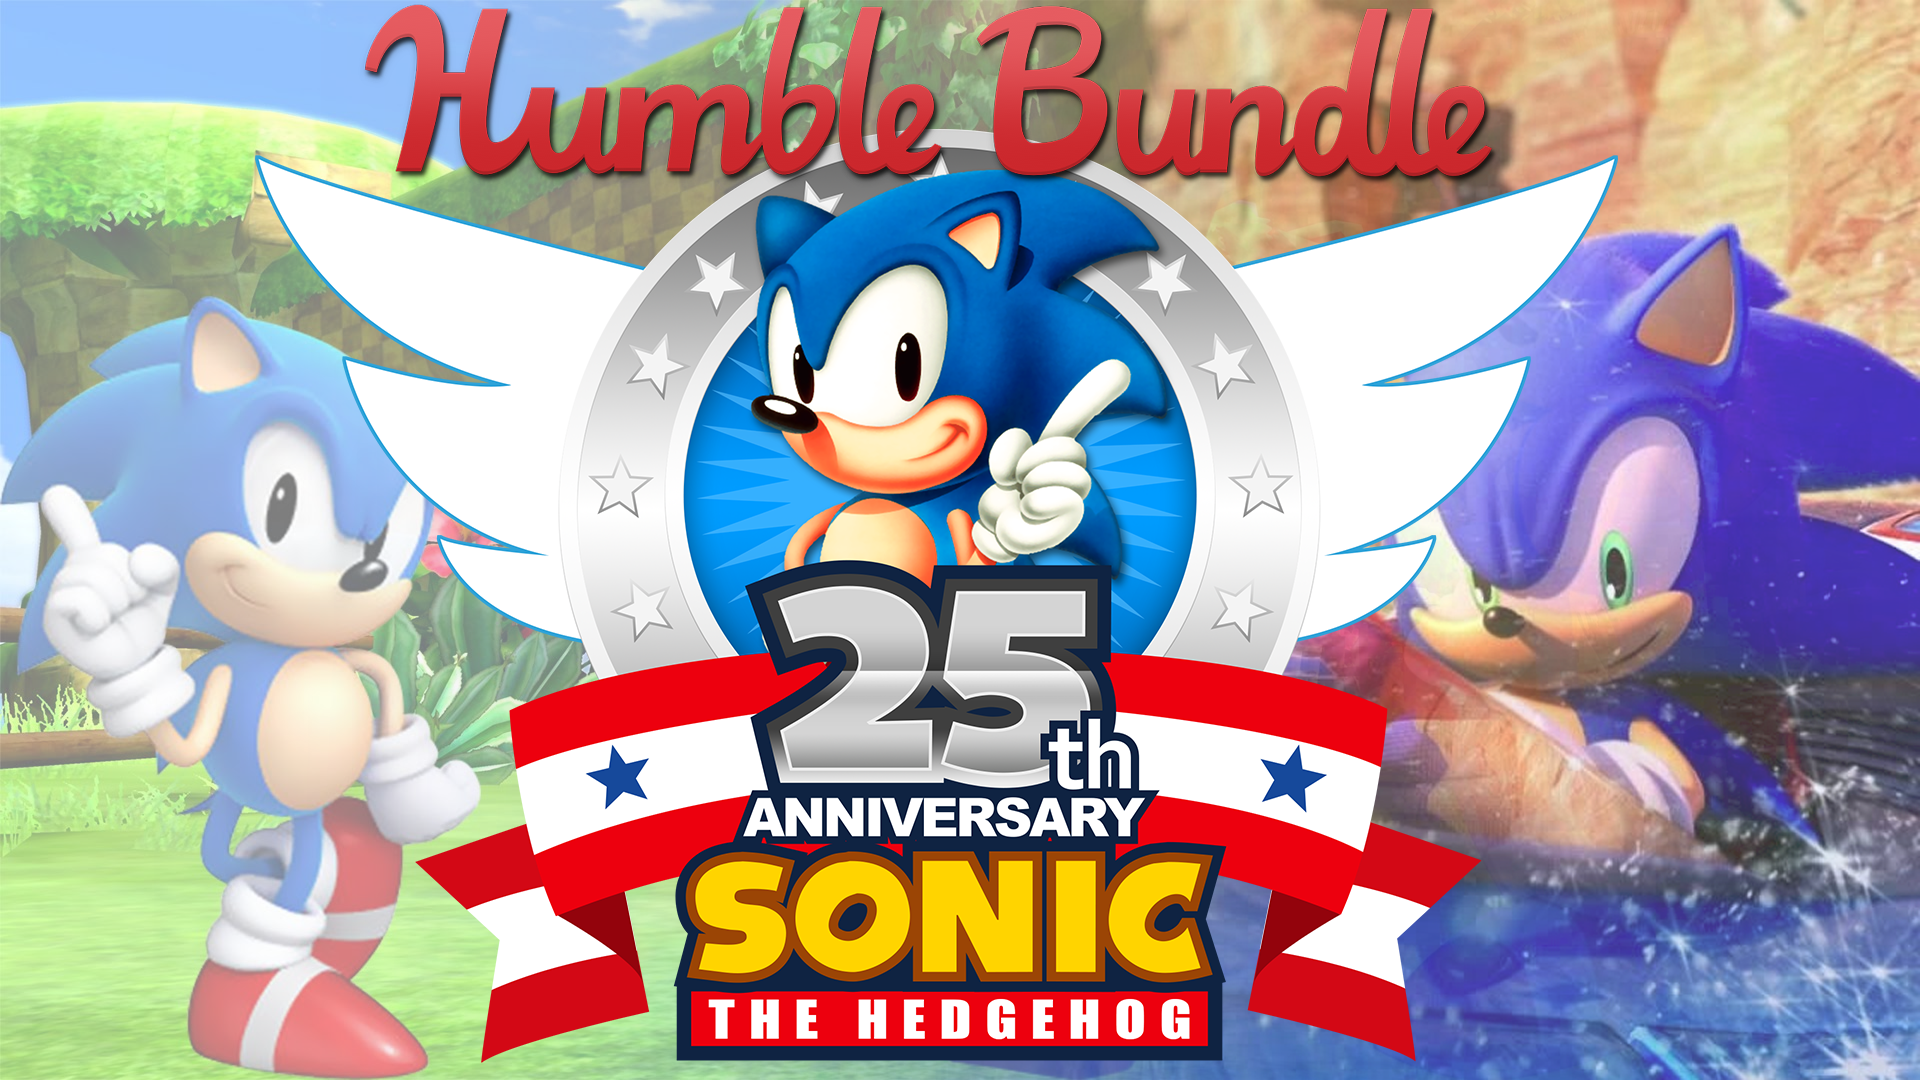 Buy Sonic the Hedgehog 4 - Episode I from the Humble Store